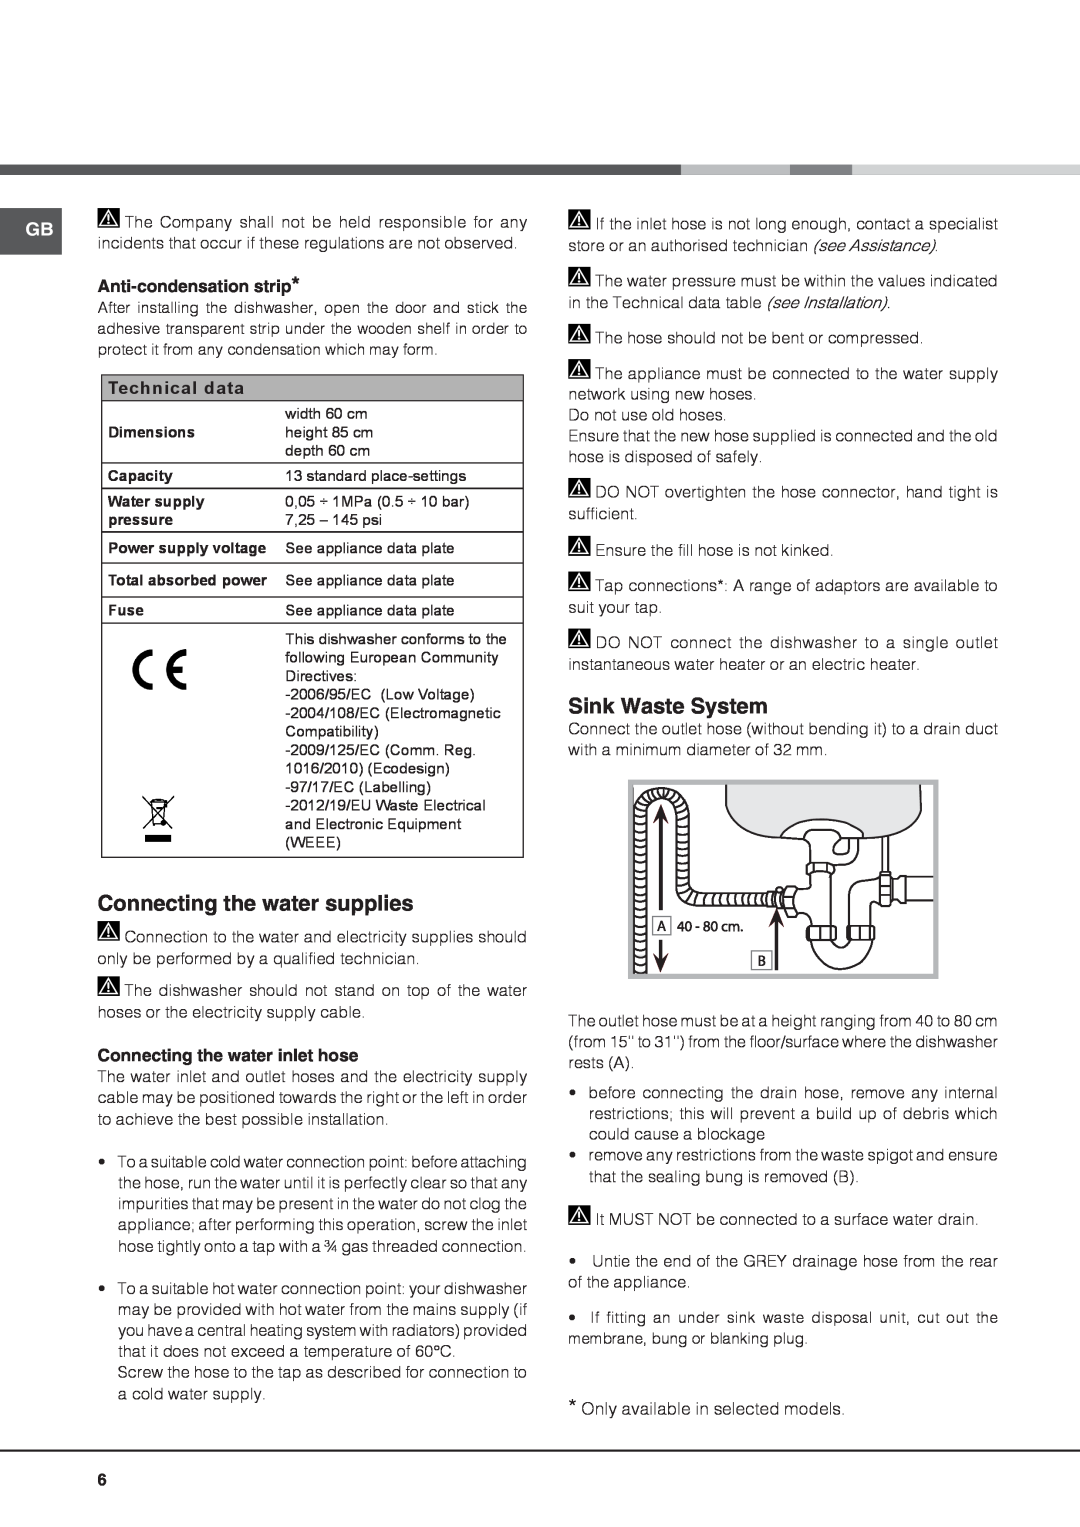 Hotpoint FDYB 10011, FDYB 11011 Connecting the water supplies, Sink Waste System, Anti-condensation strip, Technical data 